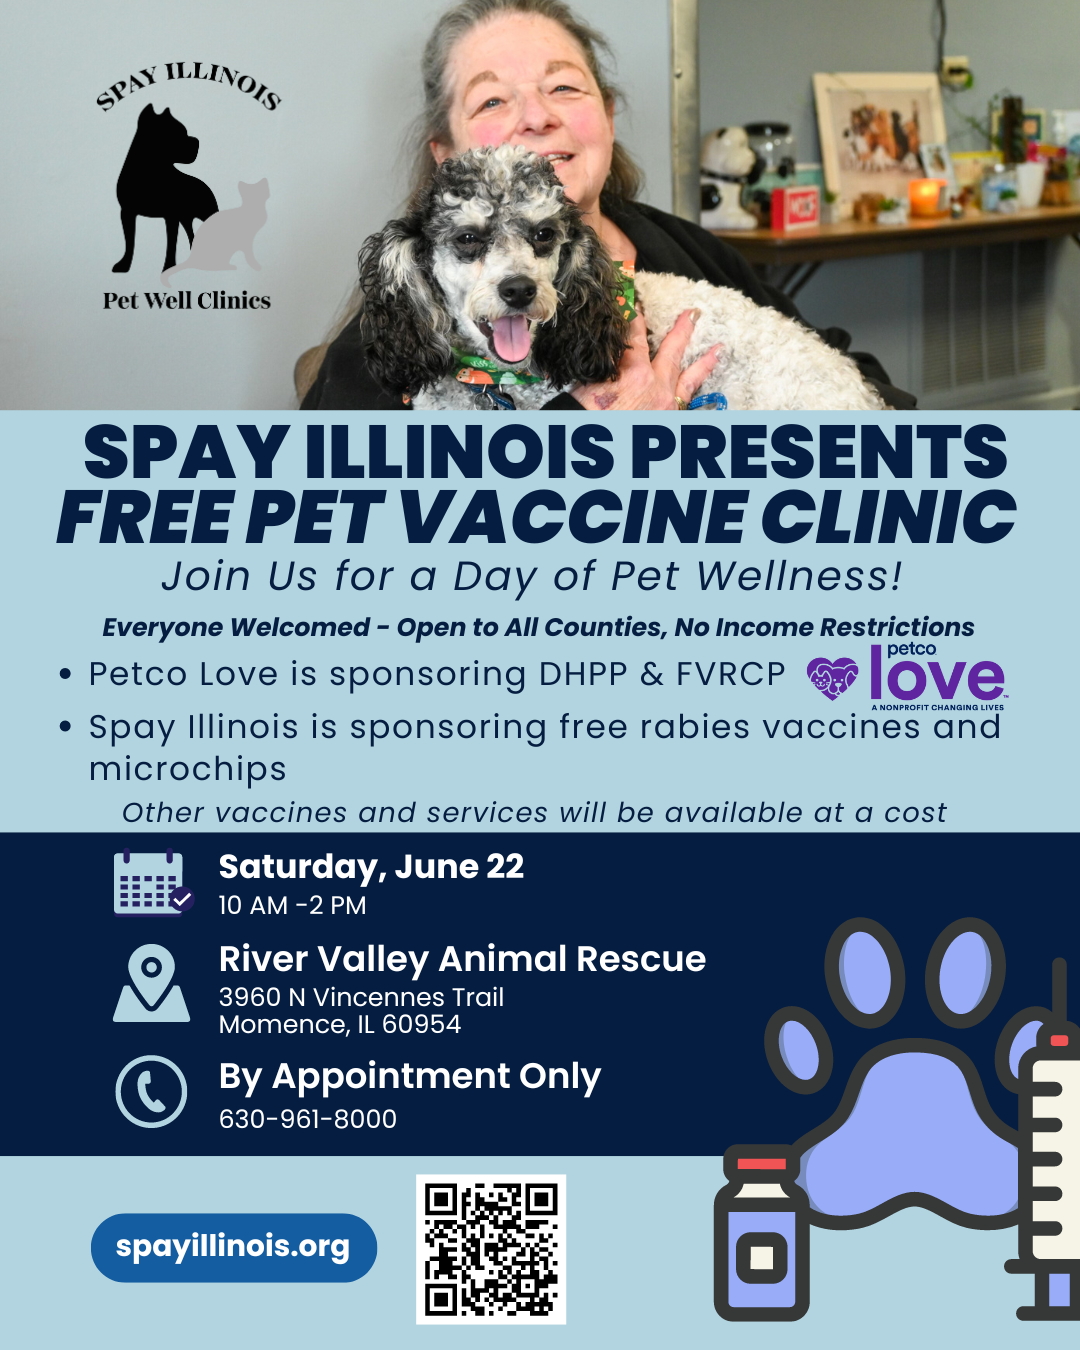 Spay Illinois Hosts Free Vaccine Clinic in Partnership with Petco Love at River Valley Animal Rescue